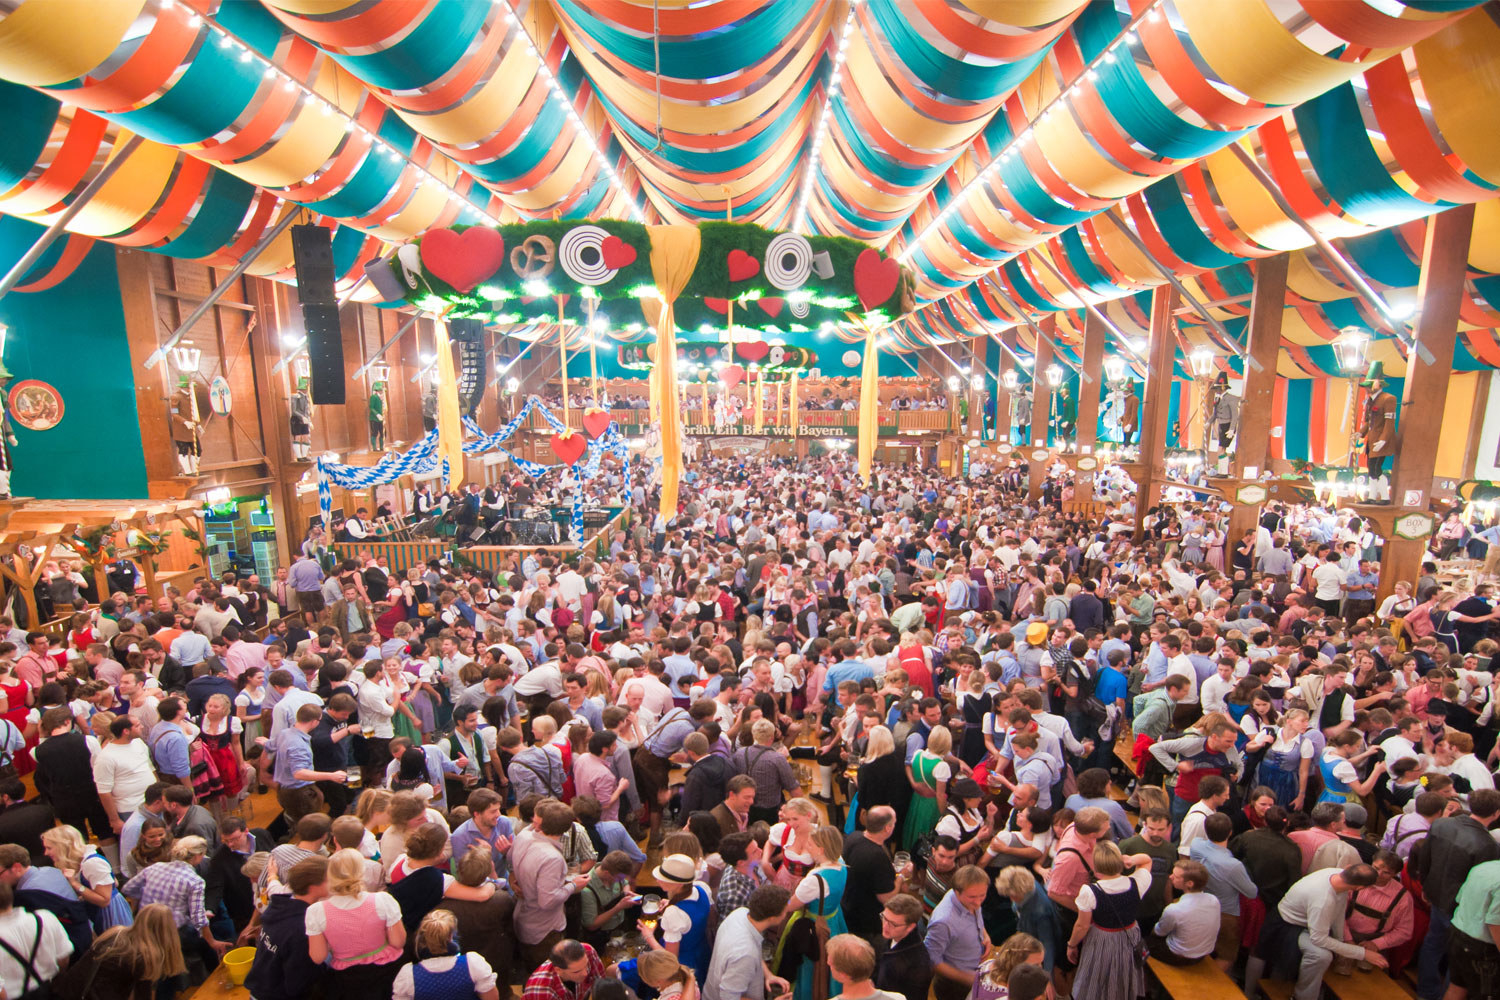 A colorful tent crowded with people